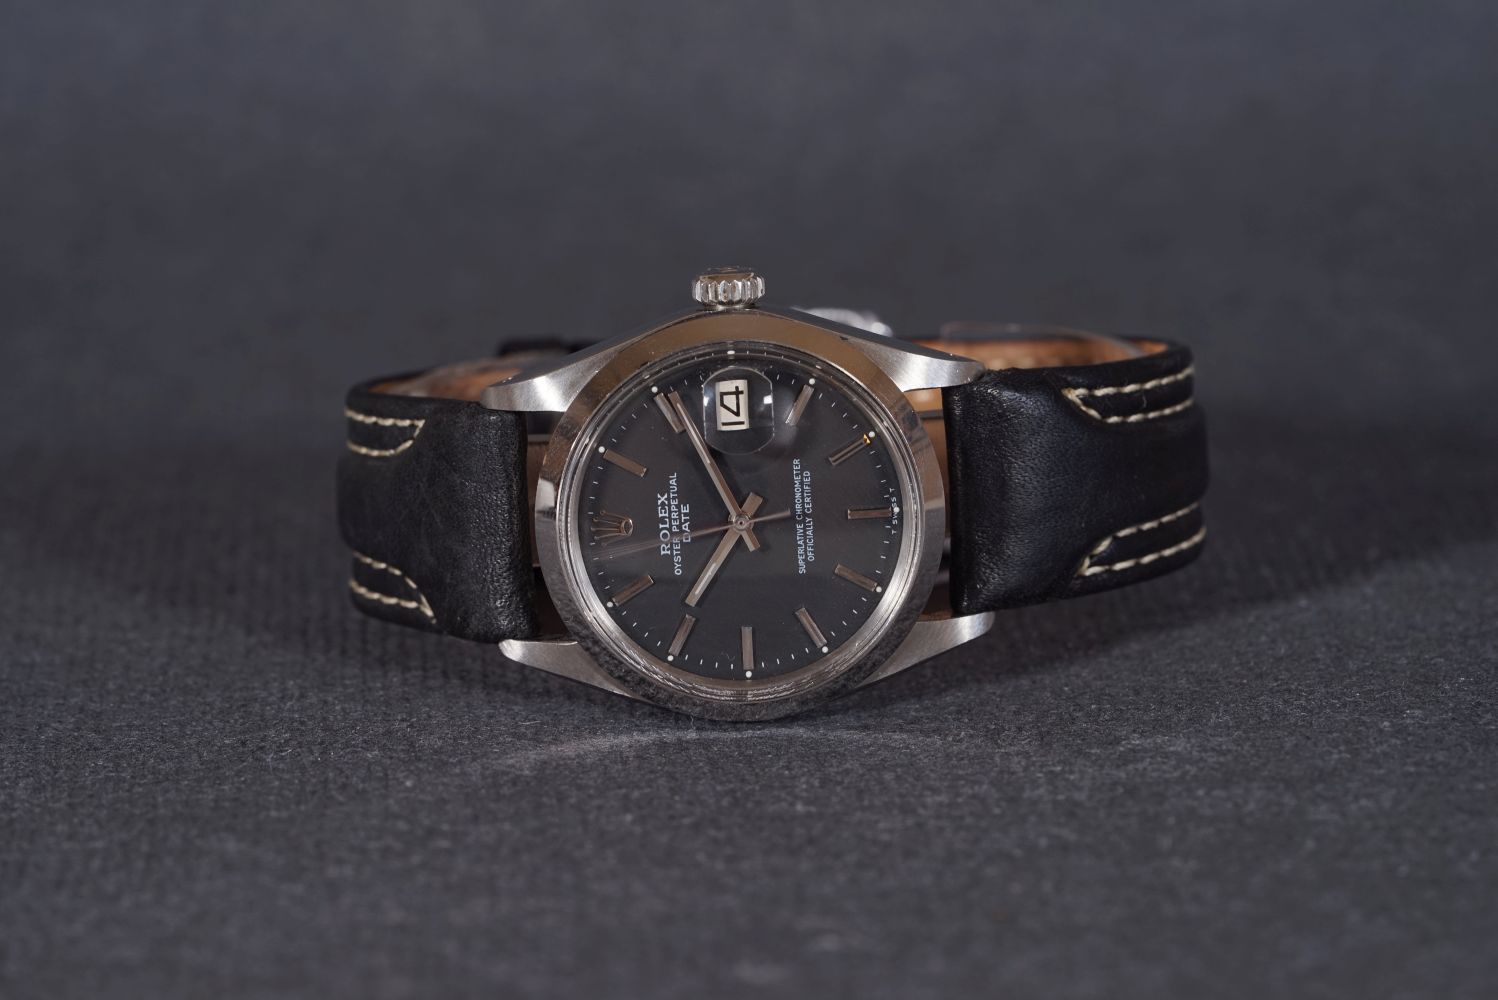 GENTLEMENS ROLEX OYSTER PERPETUAL DATE WRISTWATCH REF. 1500 CIRCA 1969, circular black dial with